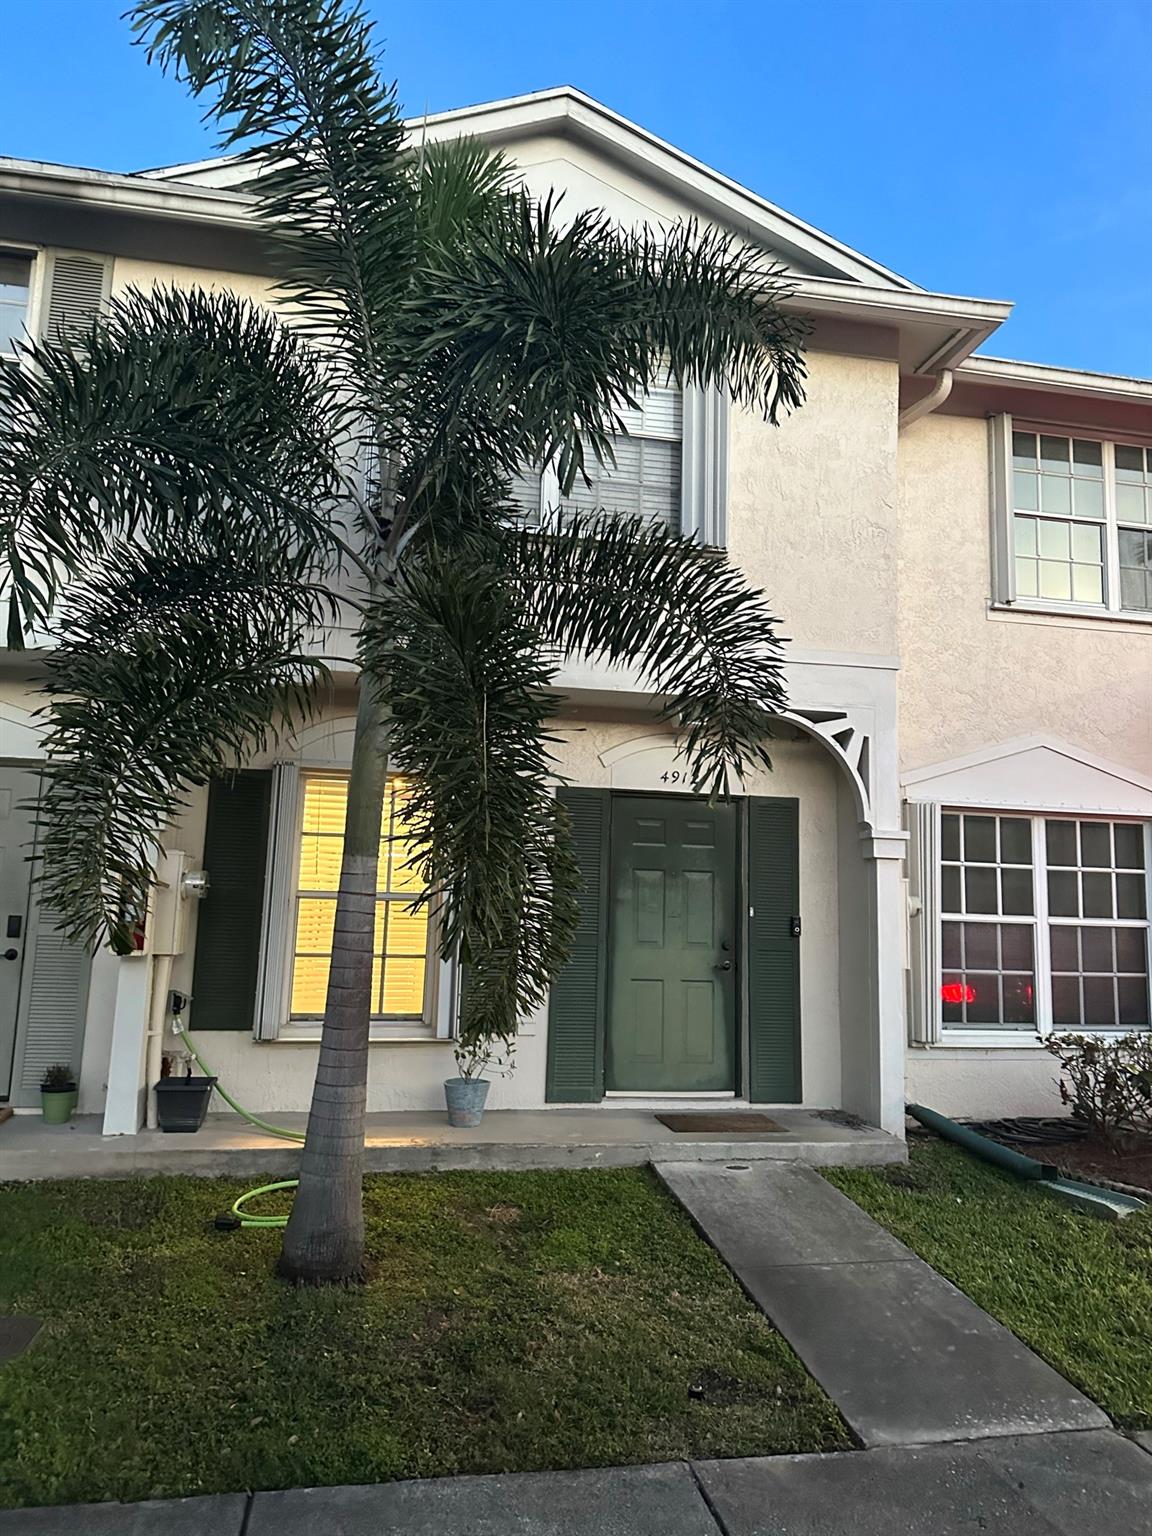 View Fort Lauderdale, FL 33312 townhome